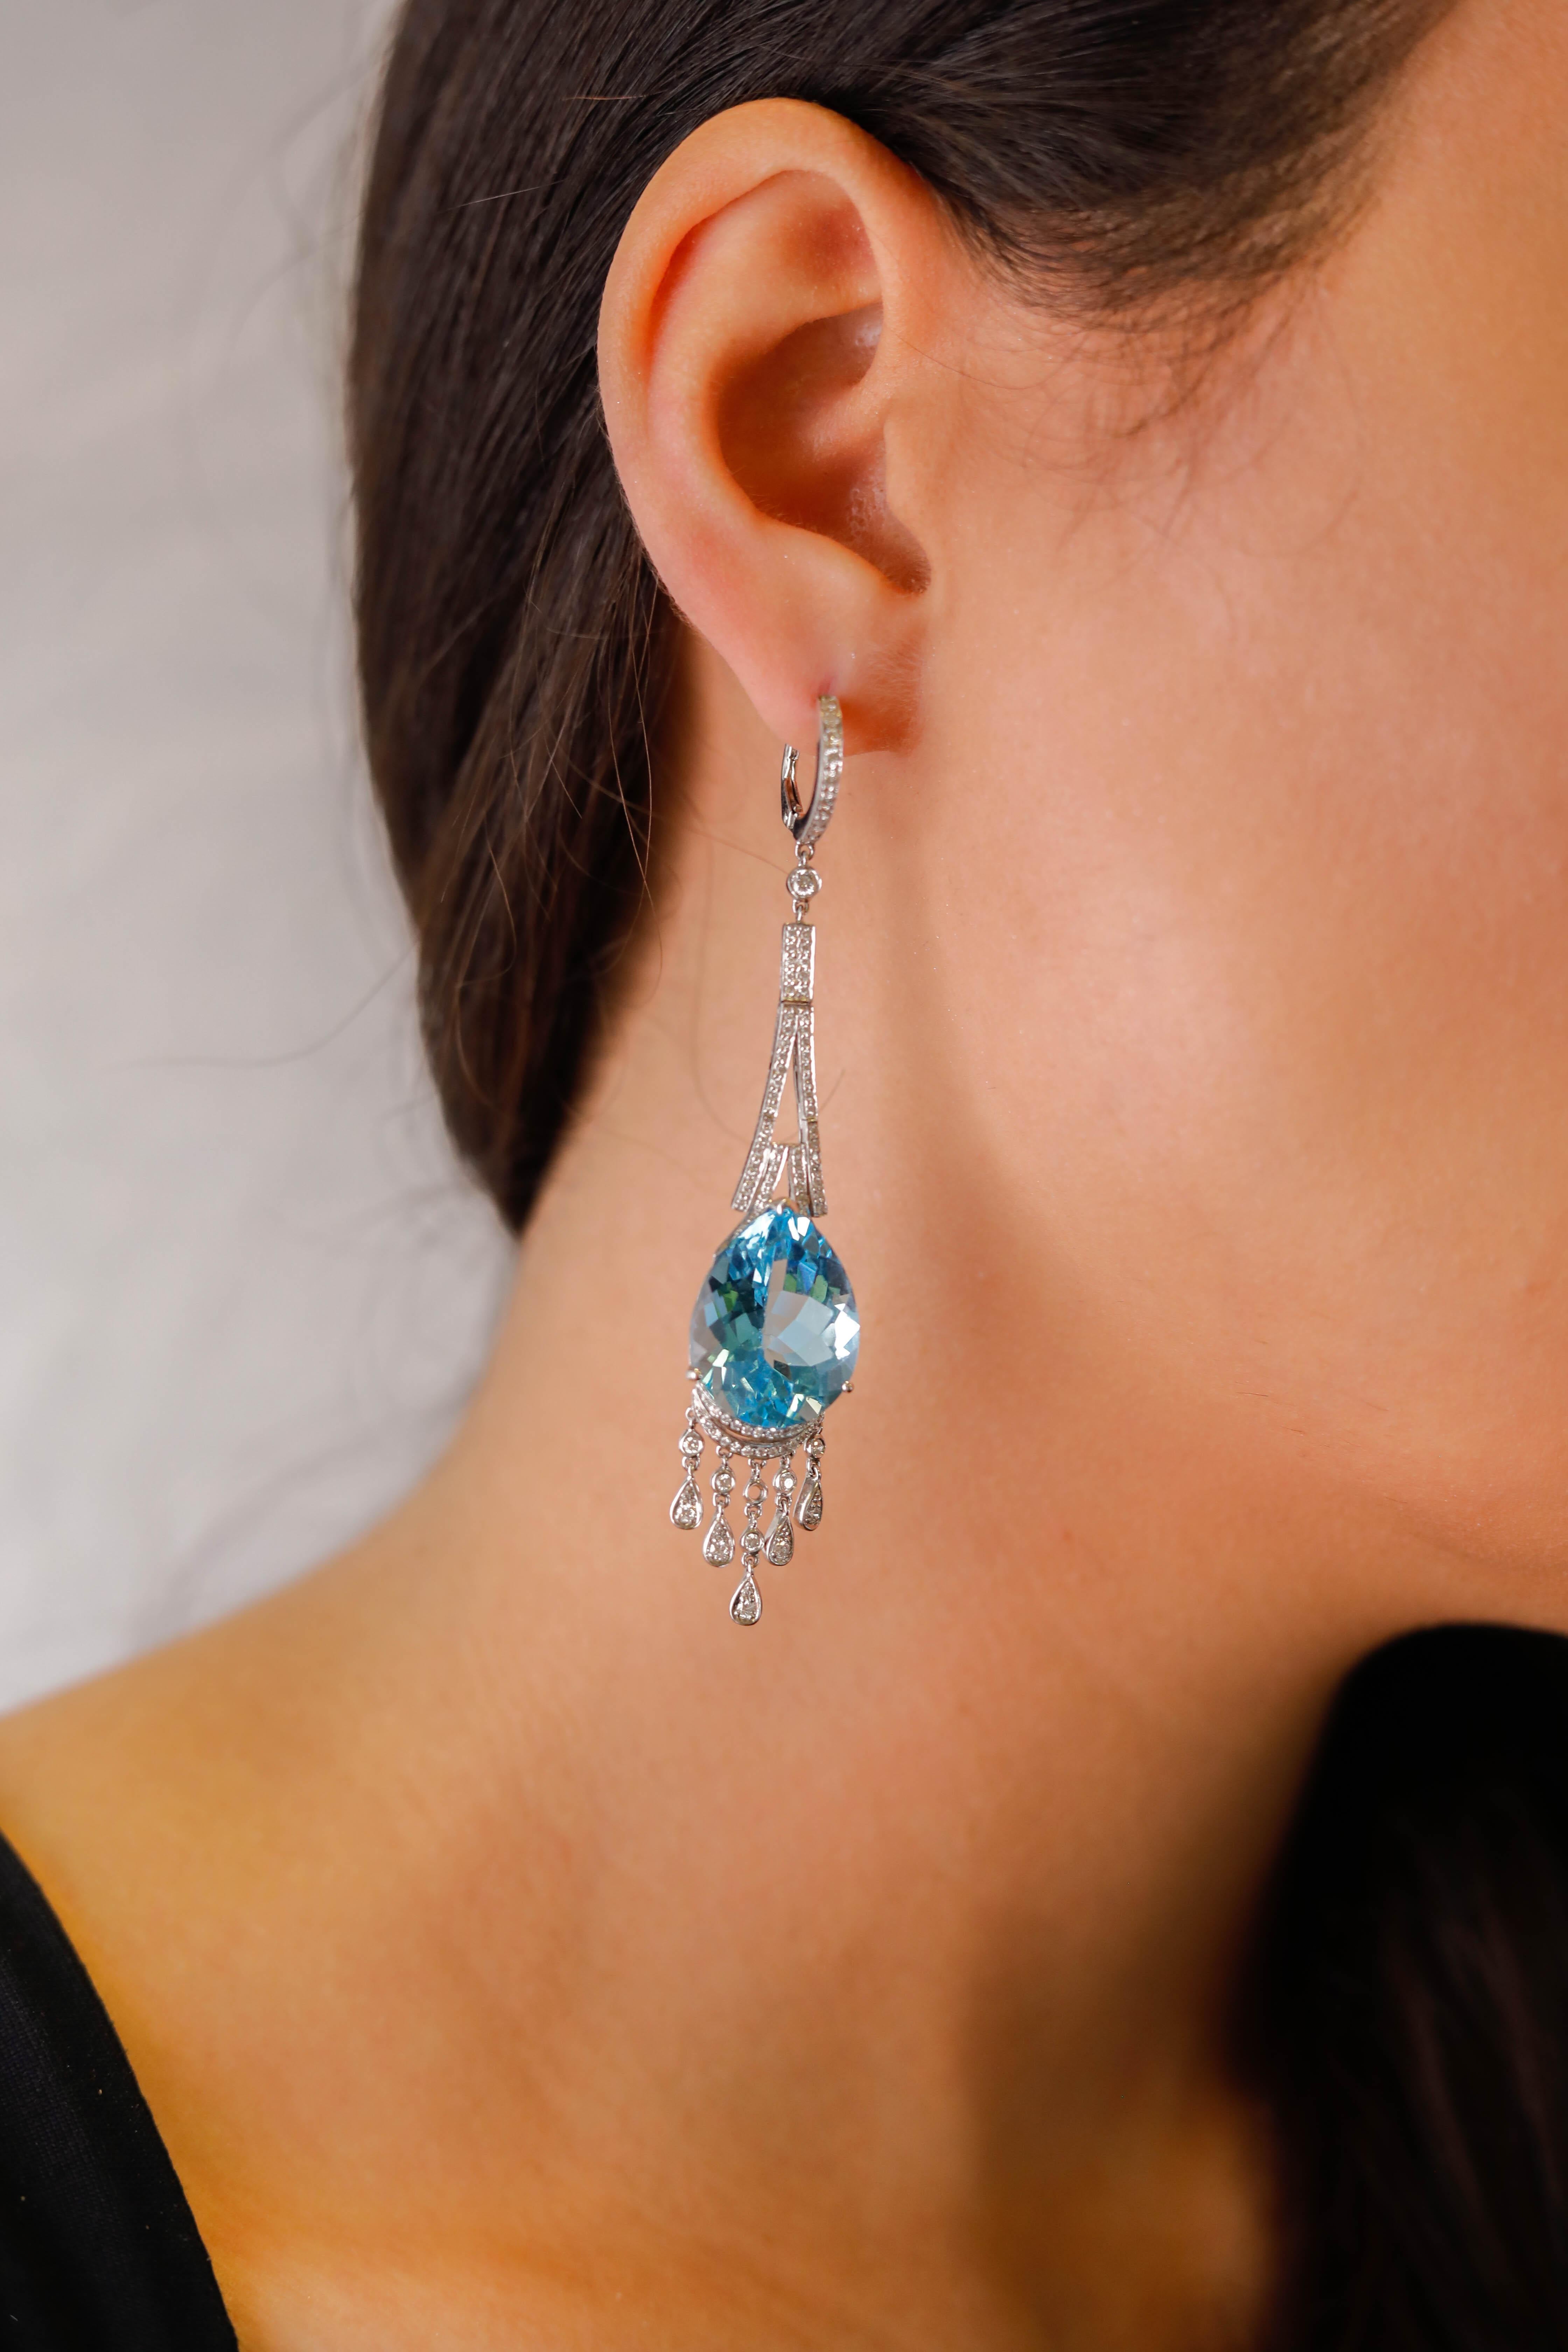  36.84 Carat Blue Topaz 1.07 Carat Diamond 18 Karat Gold Dangle Earrings Fine Jewelry 

Fashion in stunning 18k White Gold, these drop earrings show almost 37TCW of soft blue topaz dangling from a thread of 1 TCW round shimmering diamonds. A great